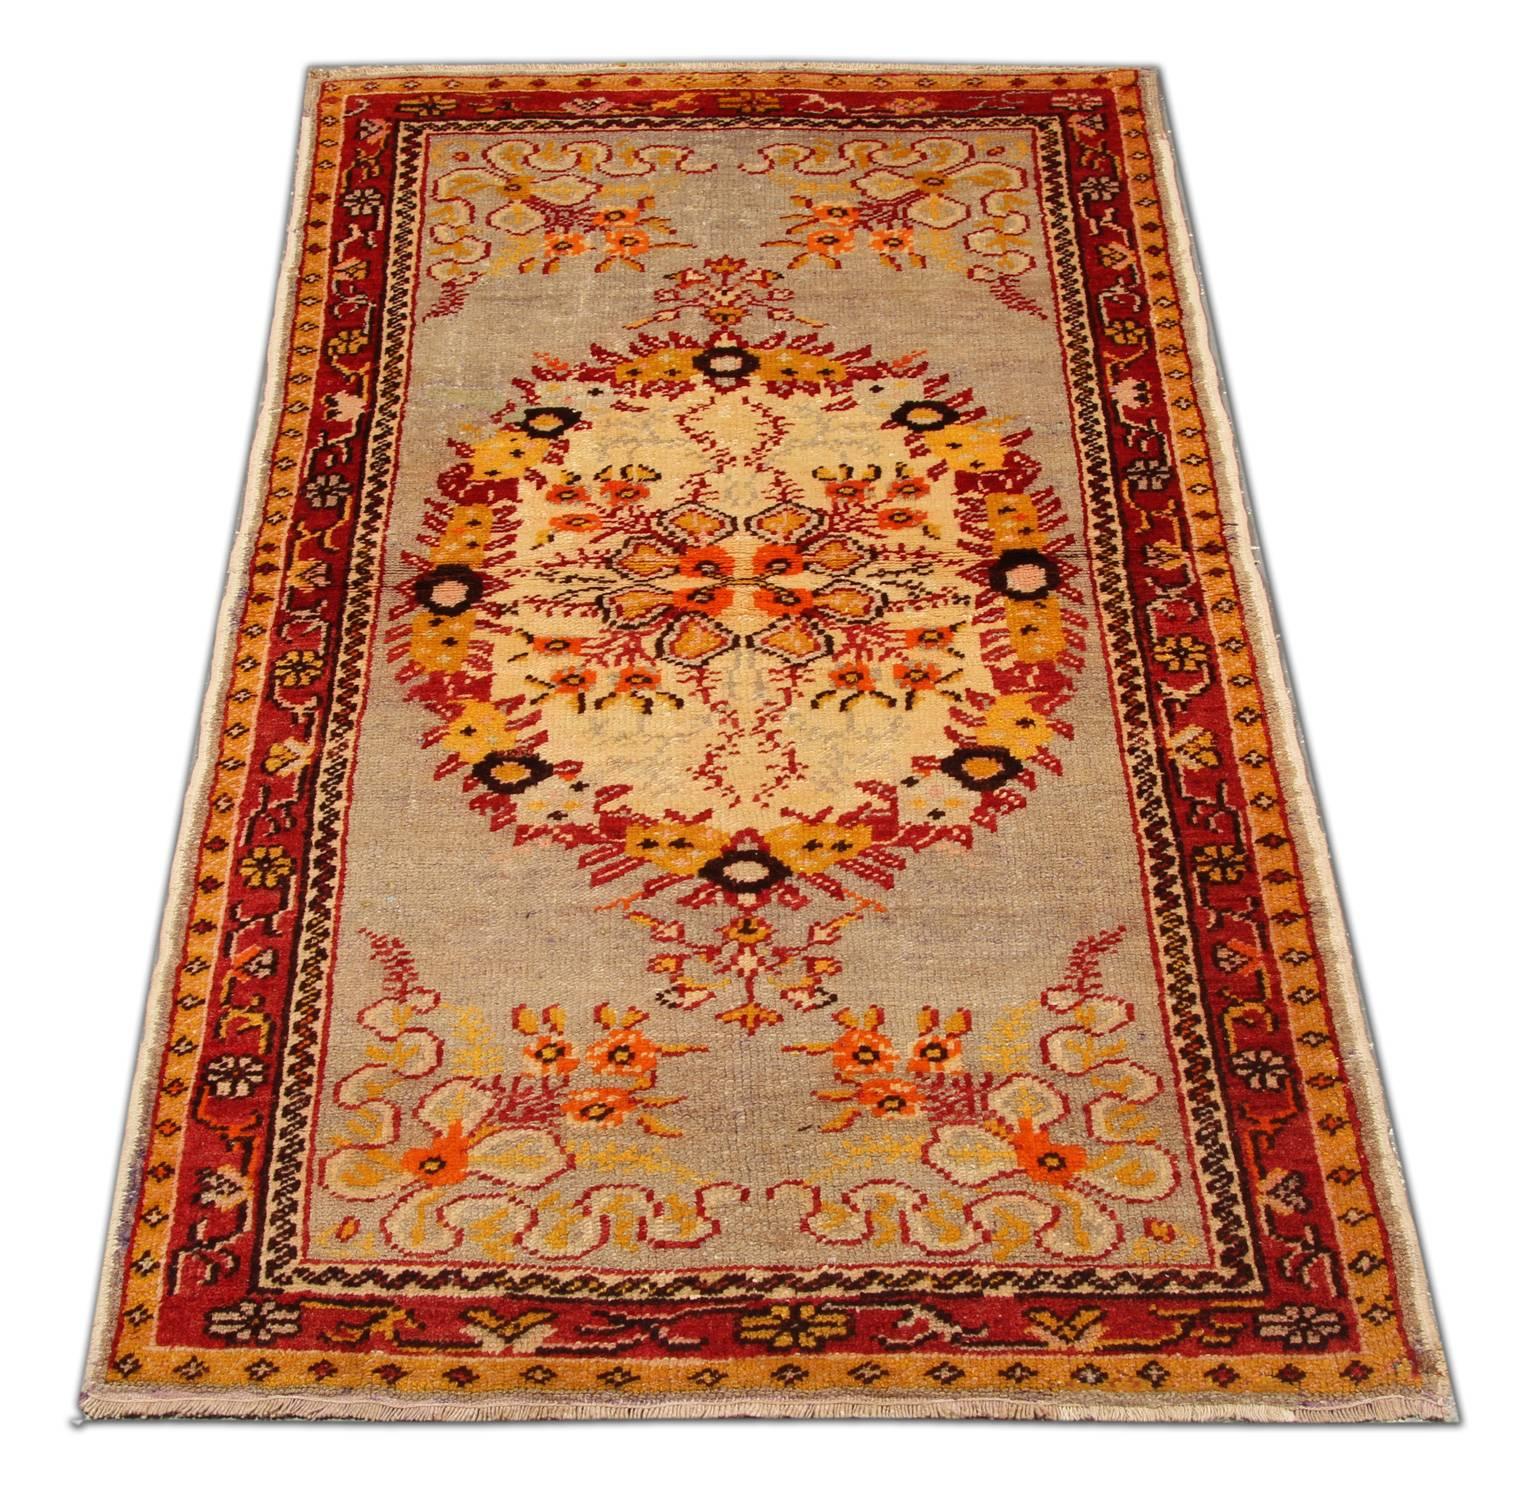 This gold rug is a kind of beautiful hand-knotted Turkish carpets or Anatolian rugs with geometric rug pattern and very elegant tribal and floral rug design. These wool rugs have vibrant natural dyes. The combination of rust red, orange, and gold in